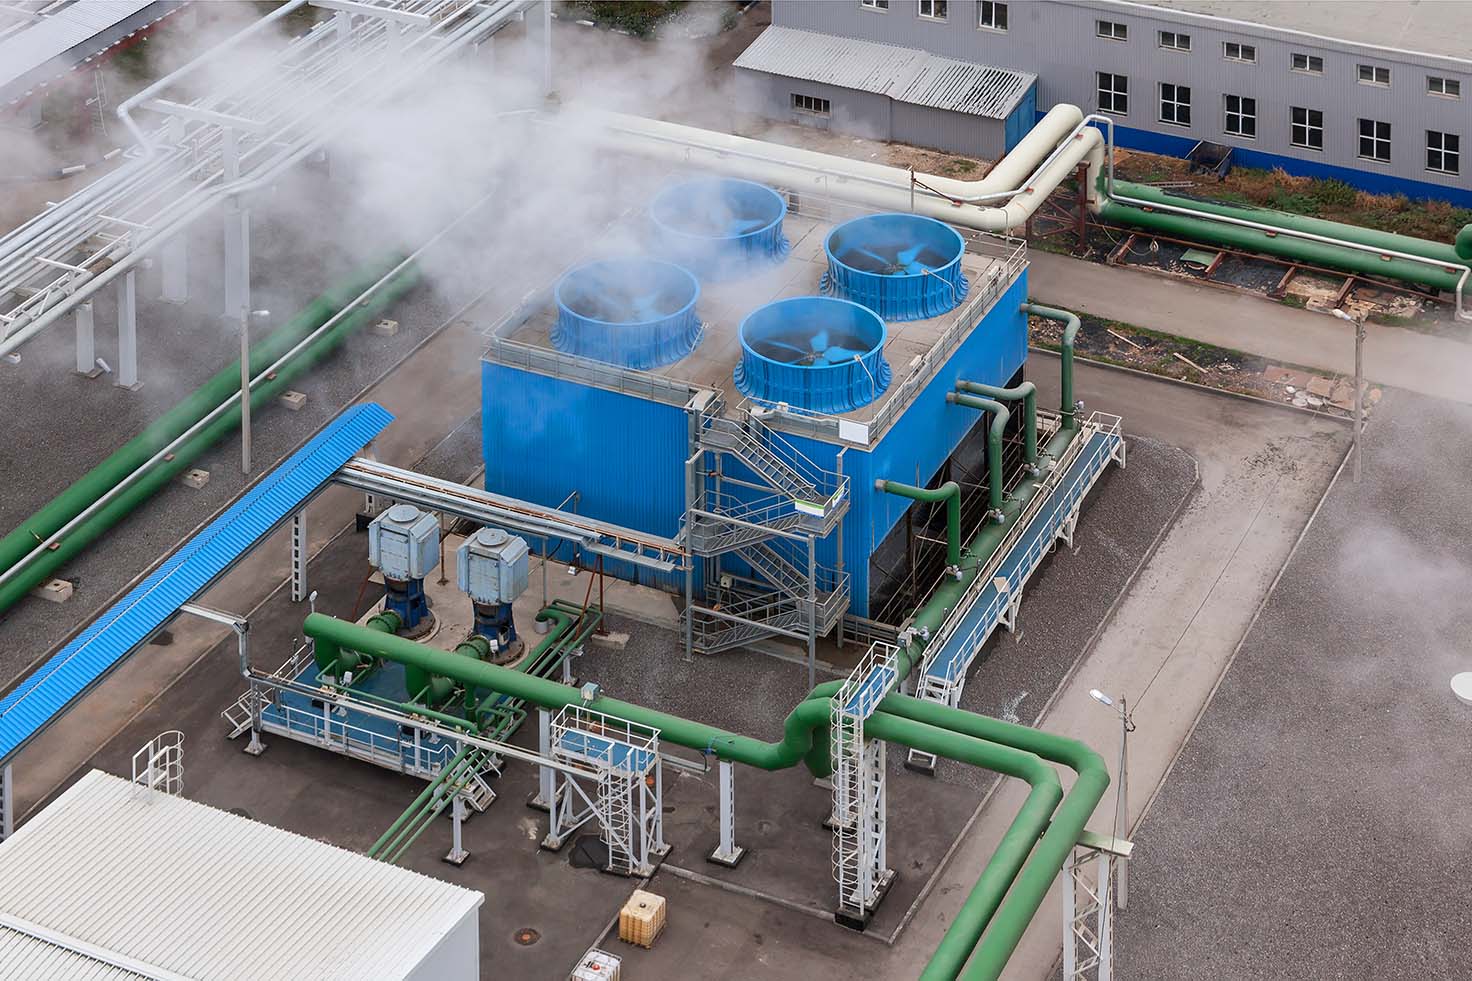 Aerial view of a cooling tower with heat transfer mechanisms